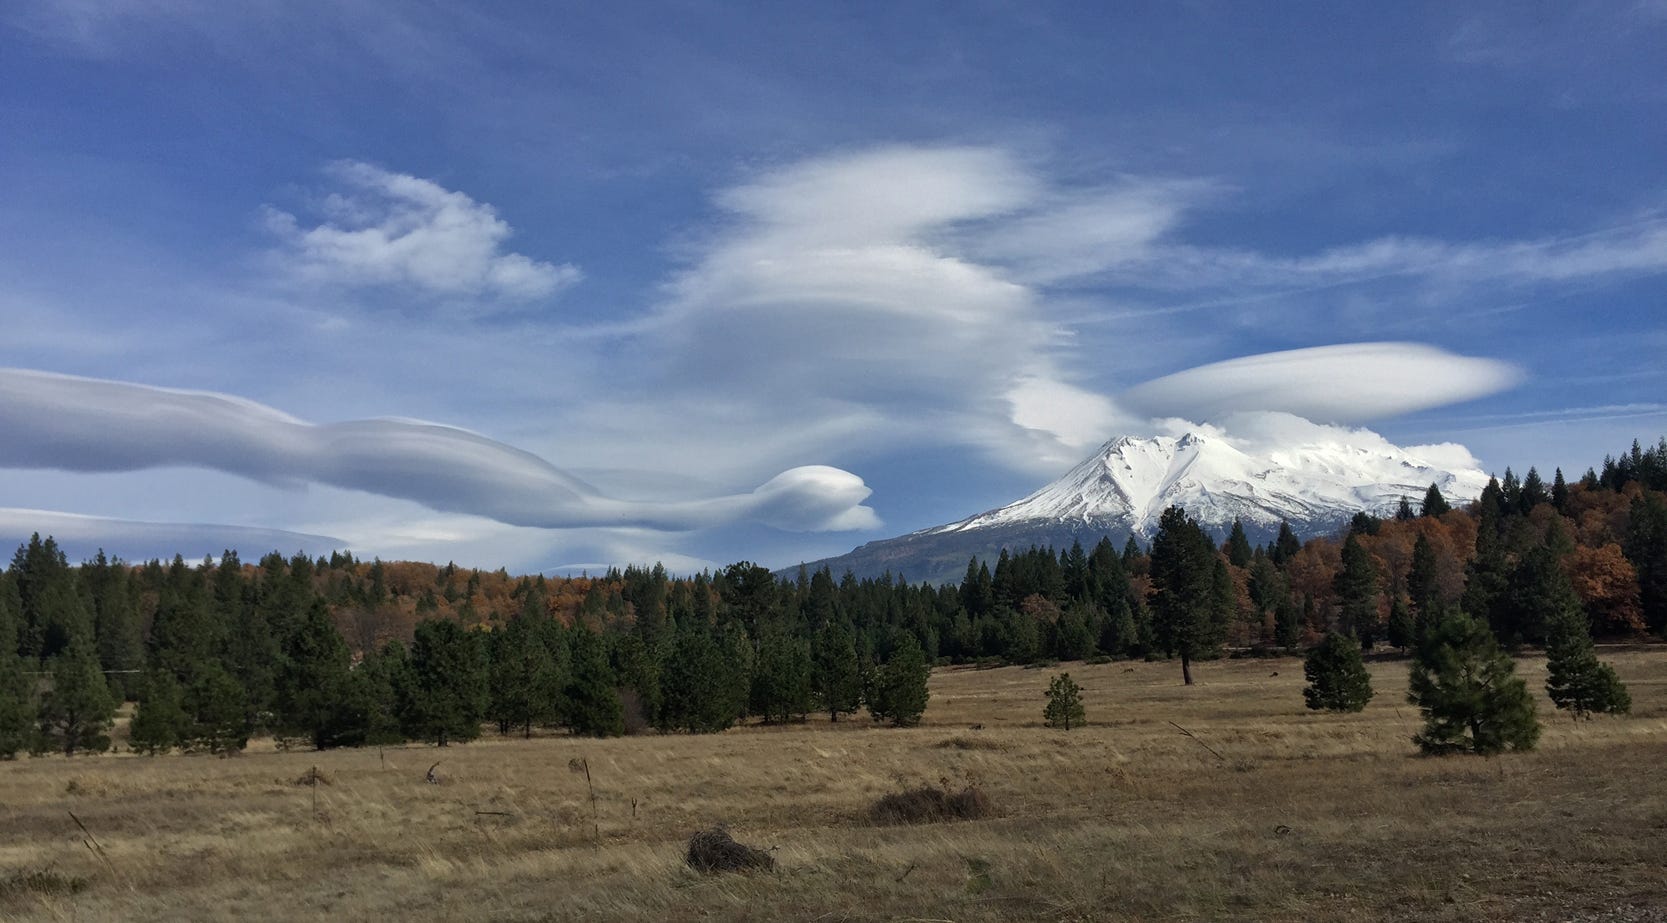 Lenticular clouds and Mt. Shasta from the Weed area, by Bill Miesse.